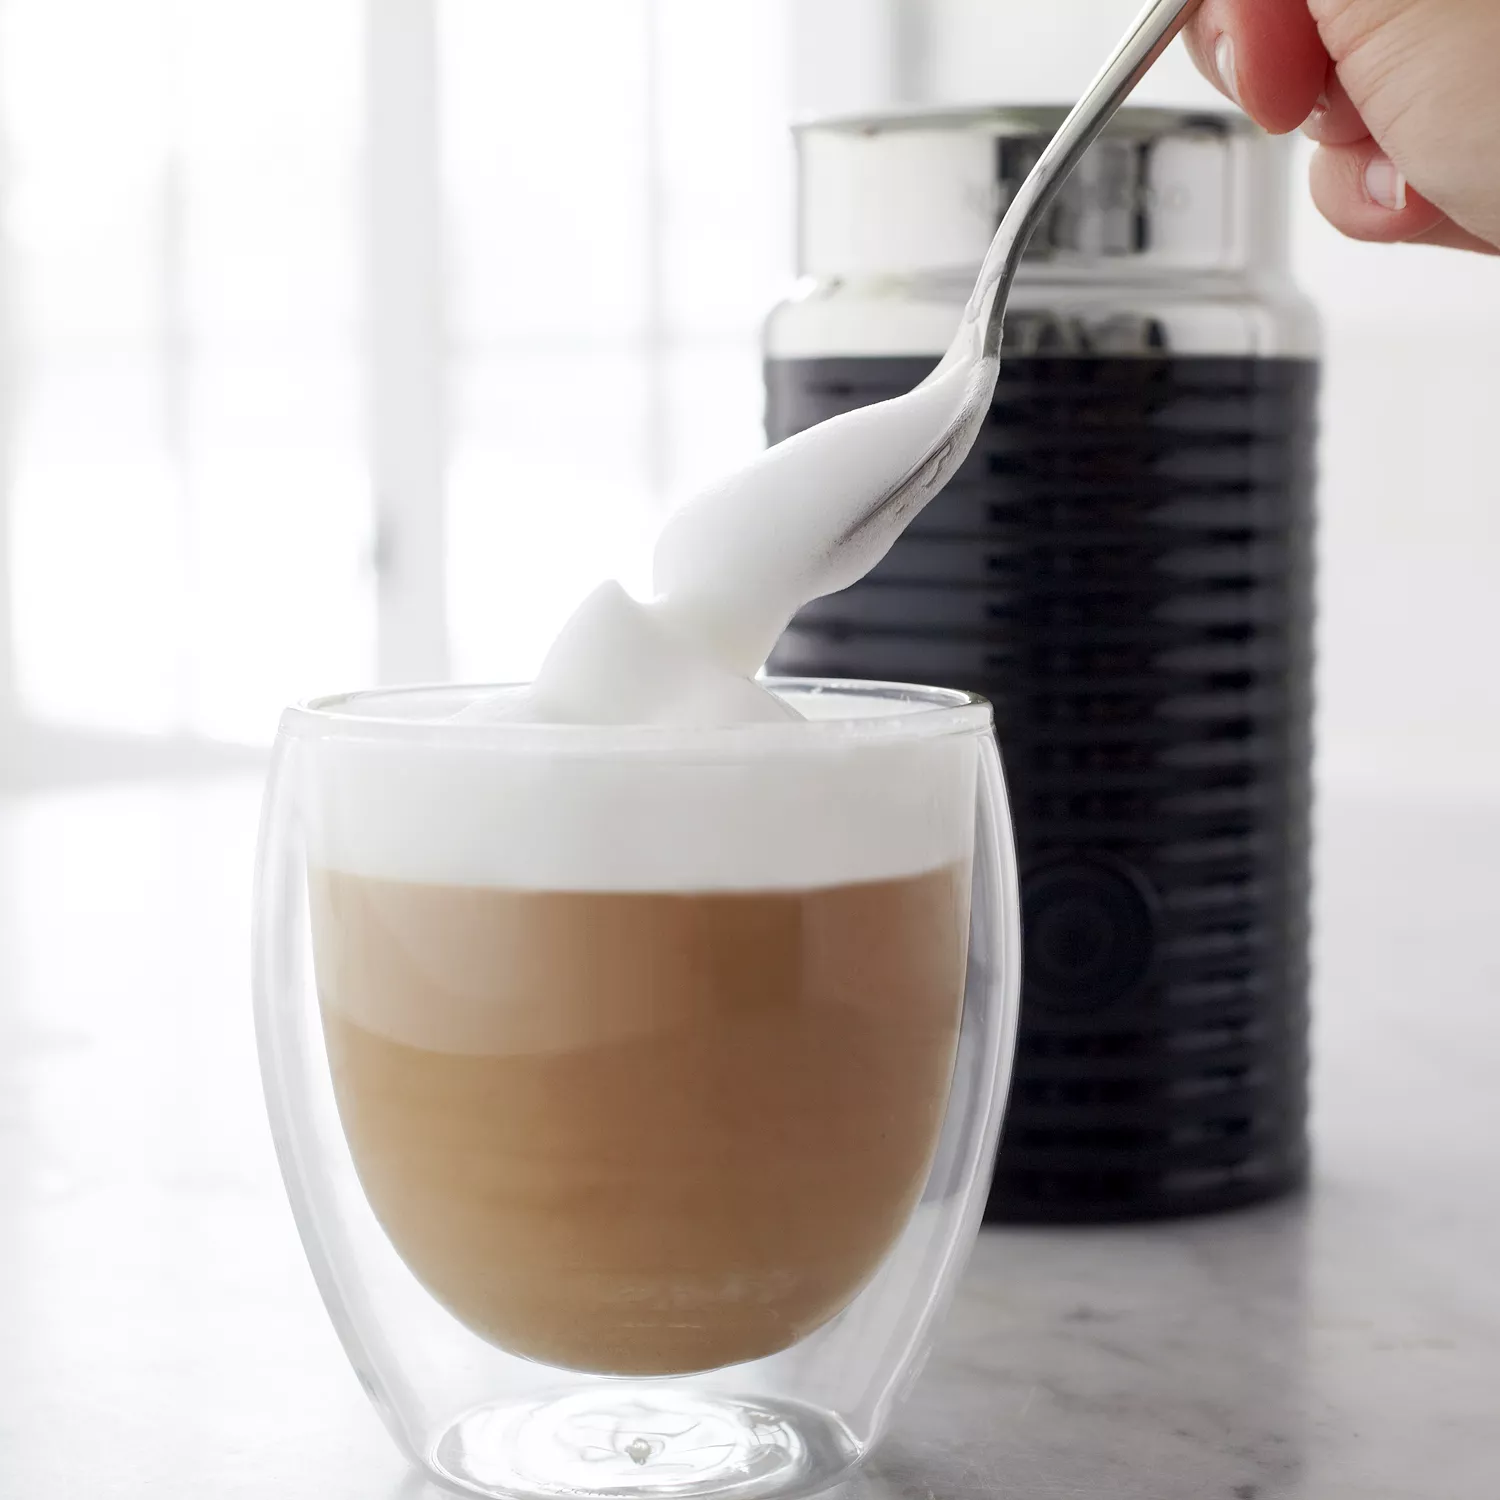 10 Nespresso Aeroccino 3 Tips and Tricks  How to get the most out of your Nespresso  Milk Frother 